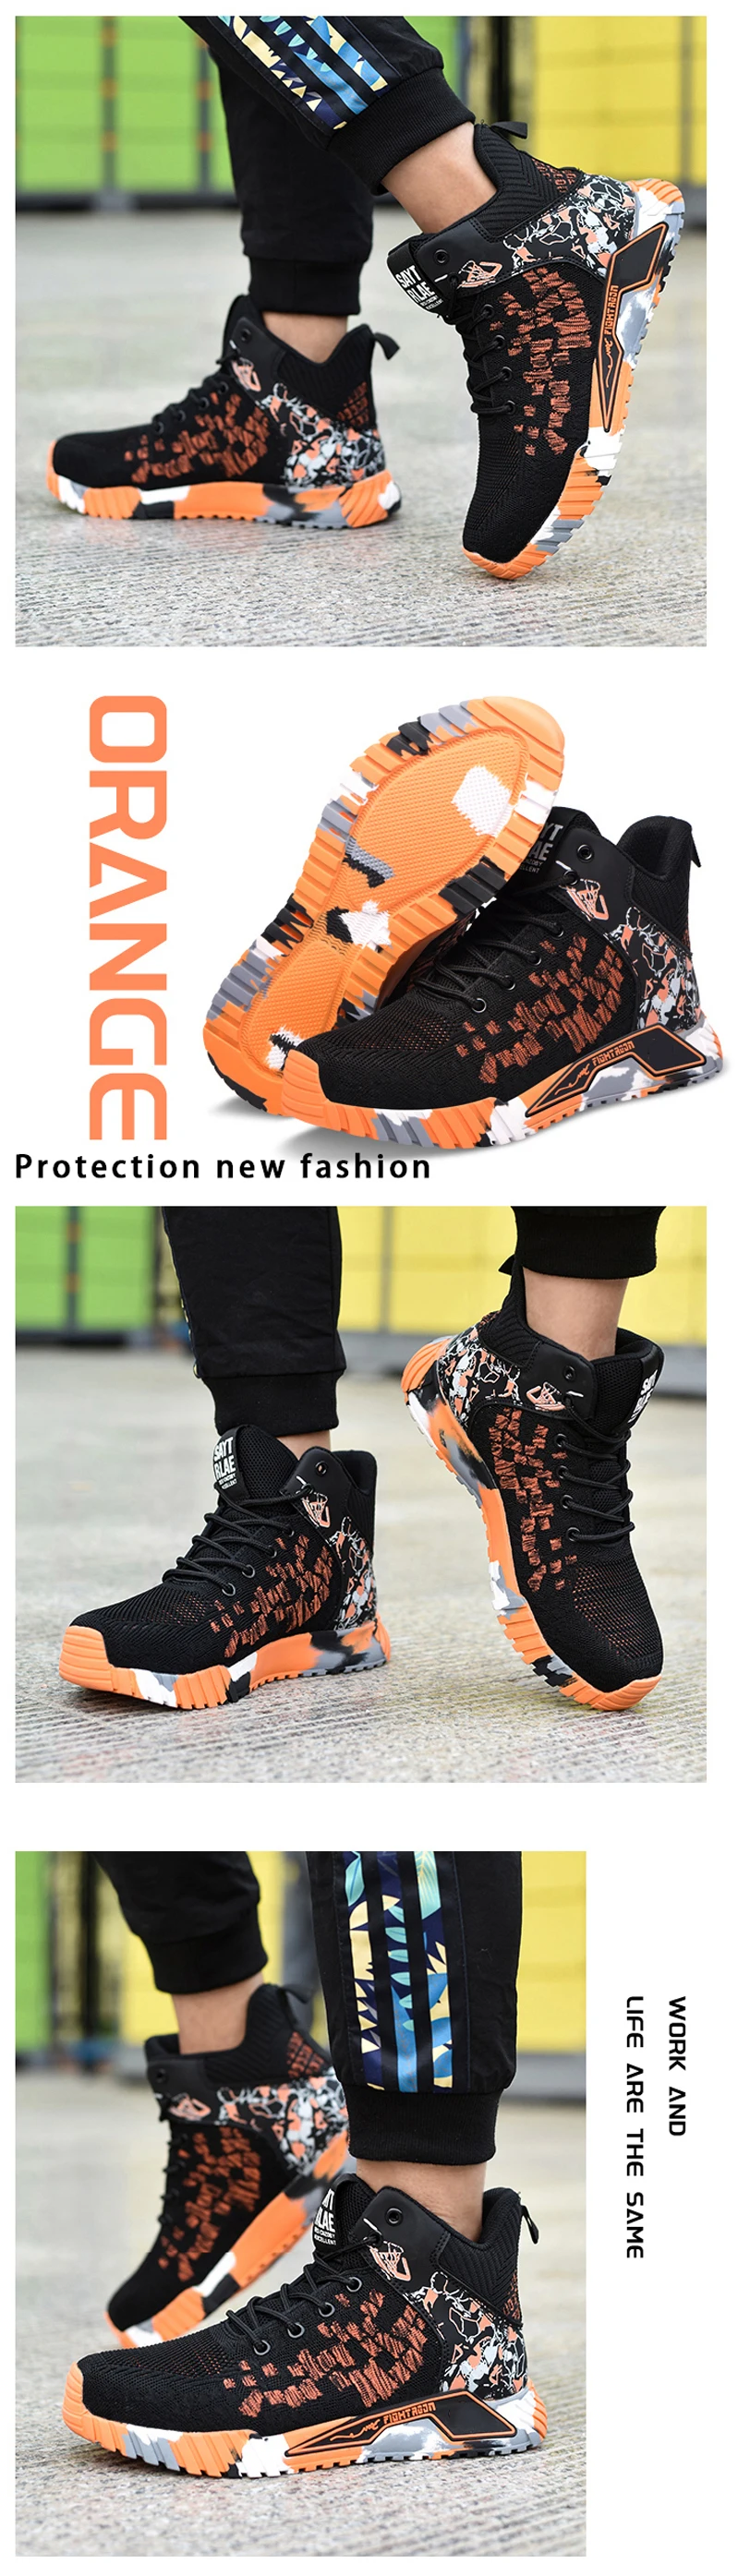 Amawei 2023 Men Boots Work Safety Boots Anti-smash Anti-puncture Work Sneakers Safety Shoes Men Shoes Indestructible Work Boots